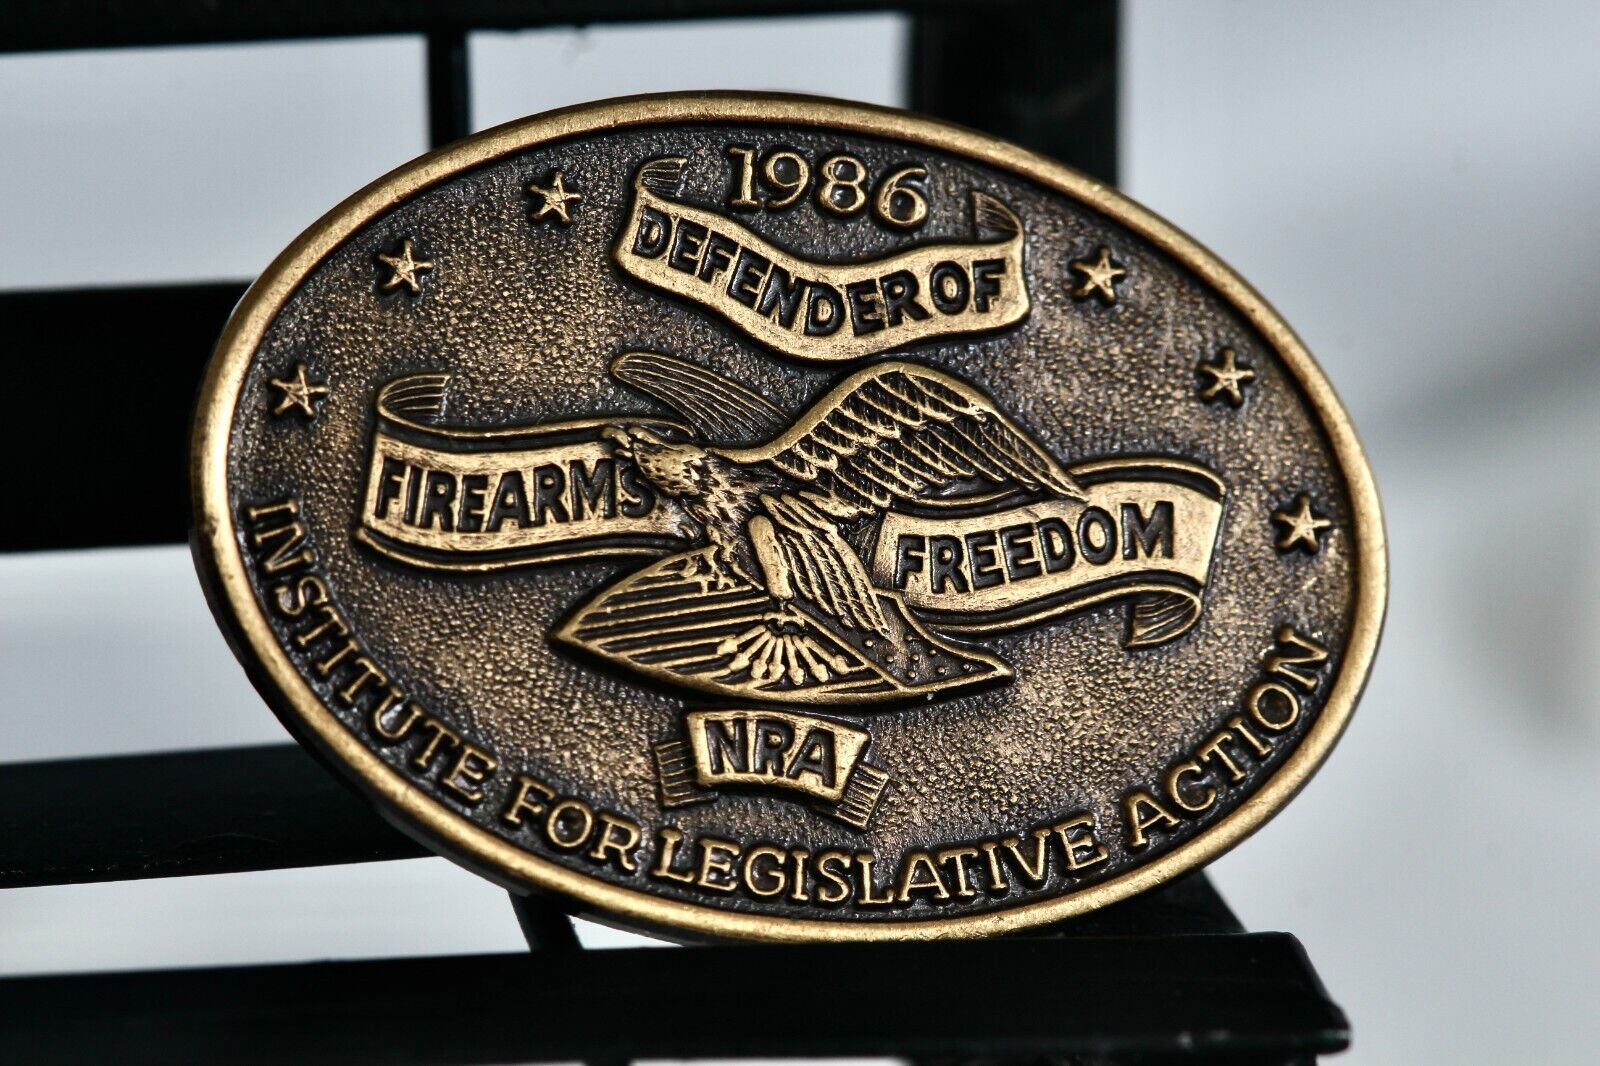 NRA 1986 Defender of Firearms & Freedom Institute For Legislative Oval Pin